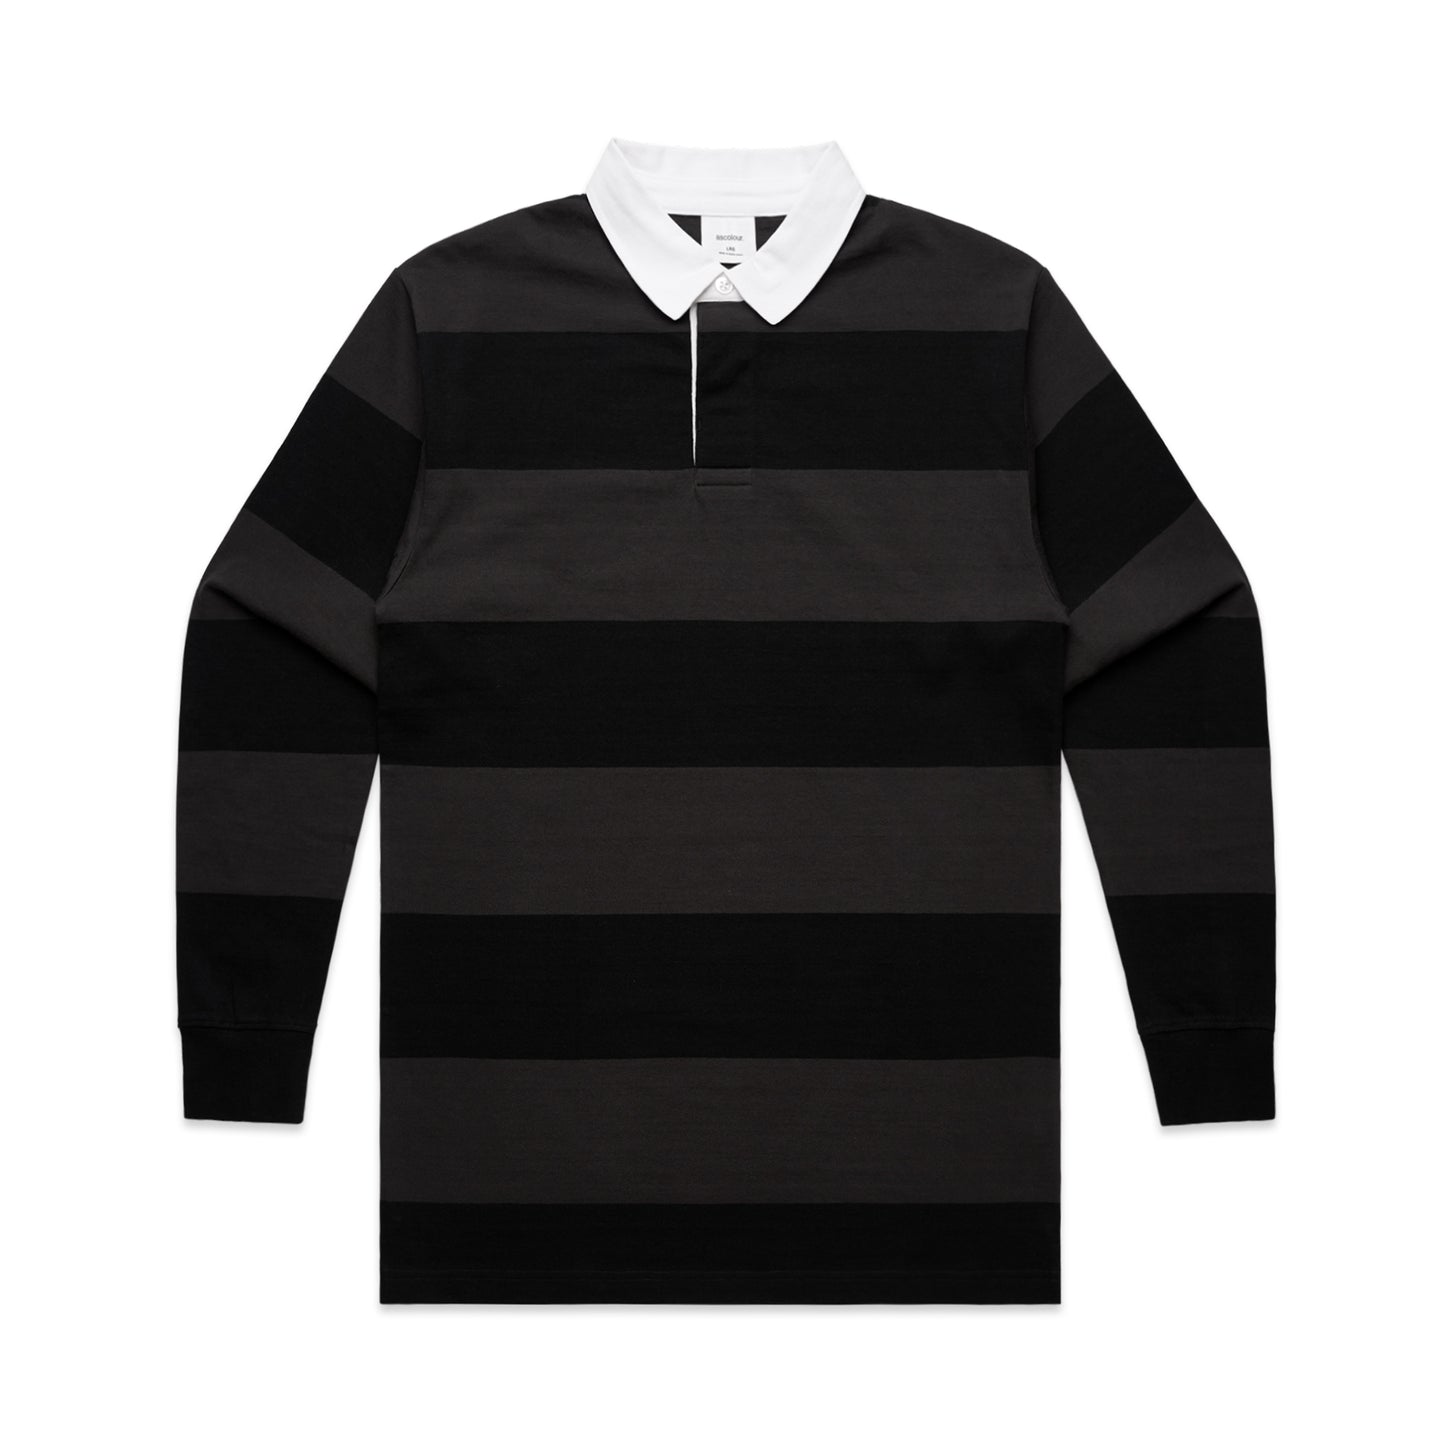 MENS RUGBY STRIPE JERSEY - 5416